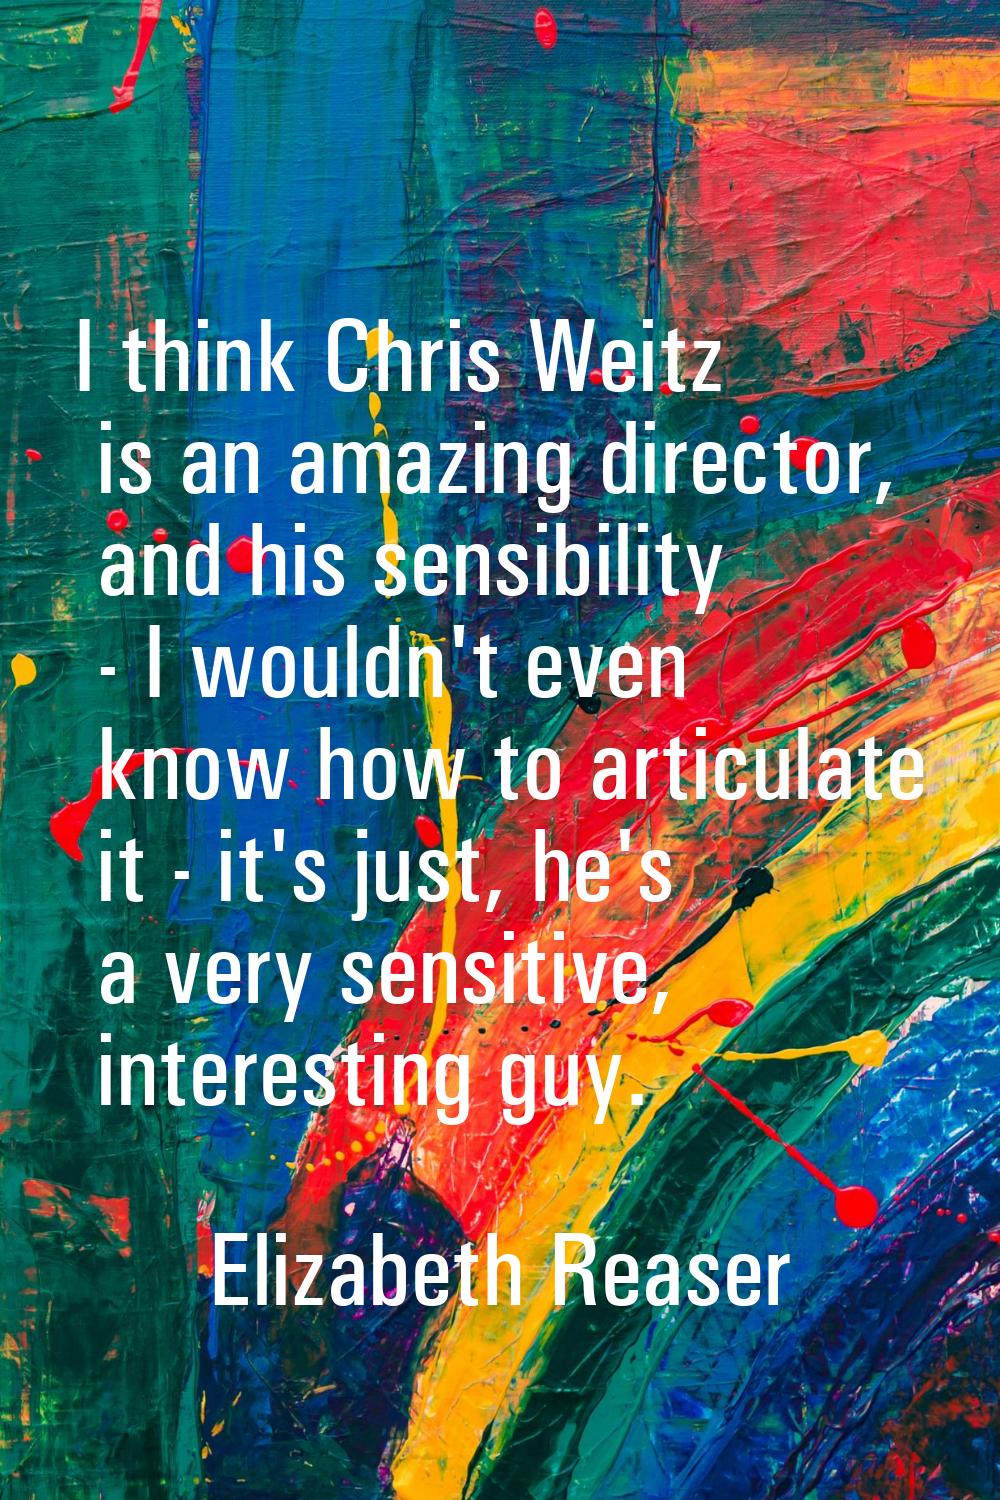 I think Chris Weitz is an amazing director, and his sensibility - I wouldn't even know how to artic